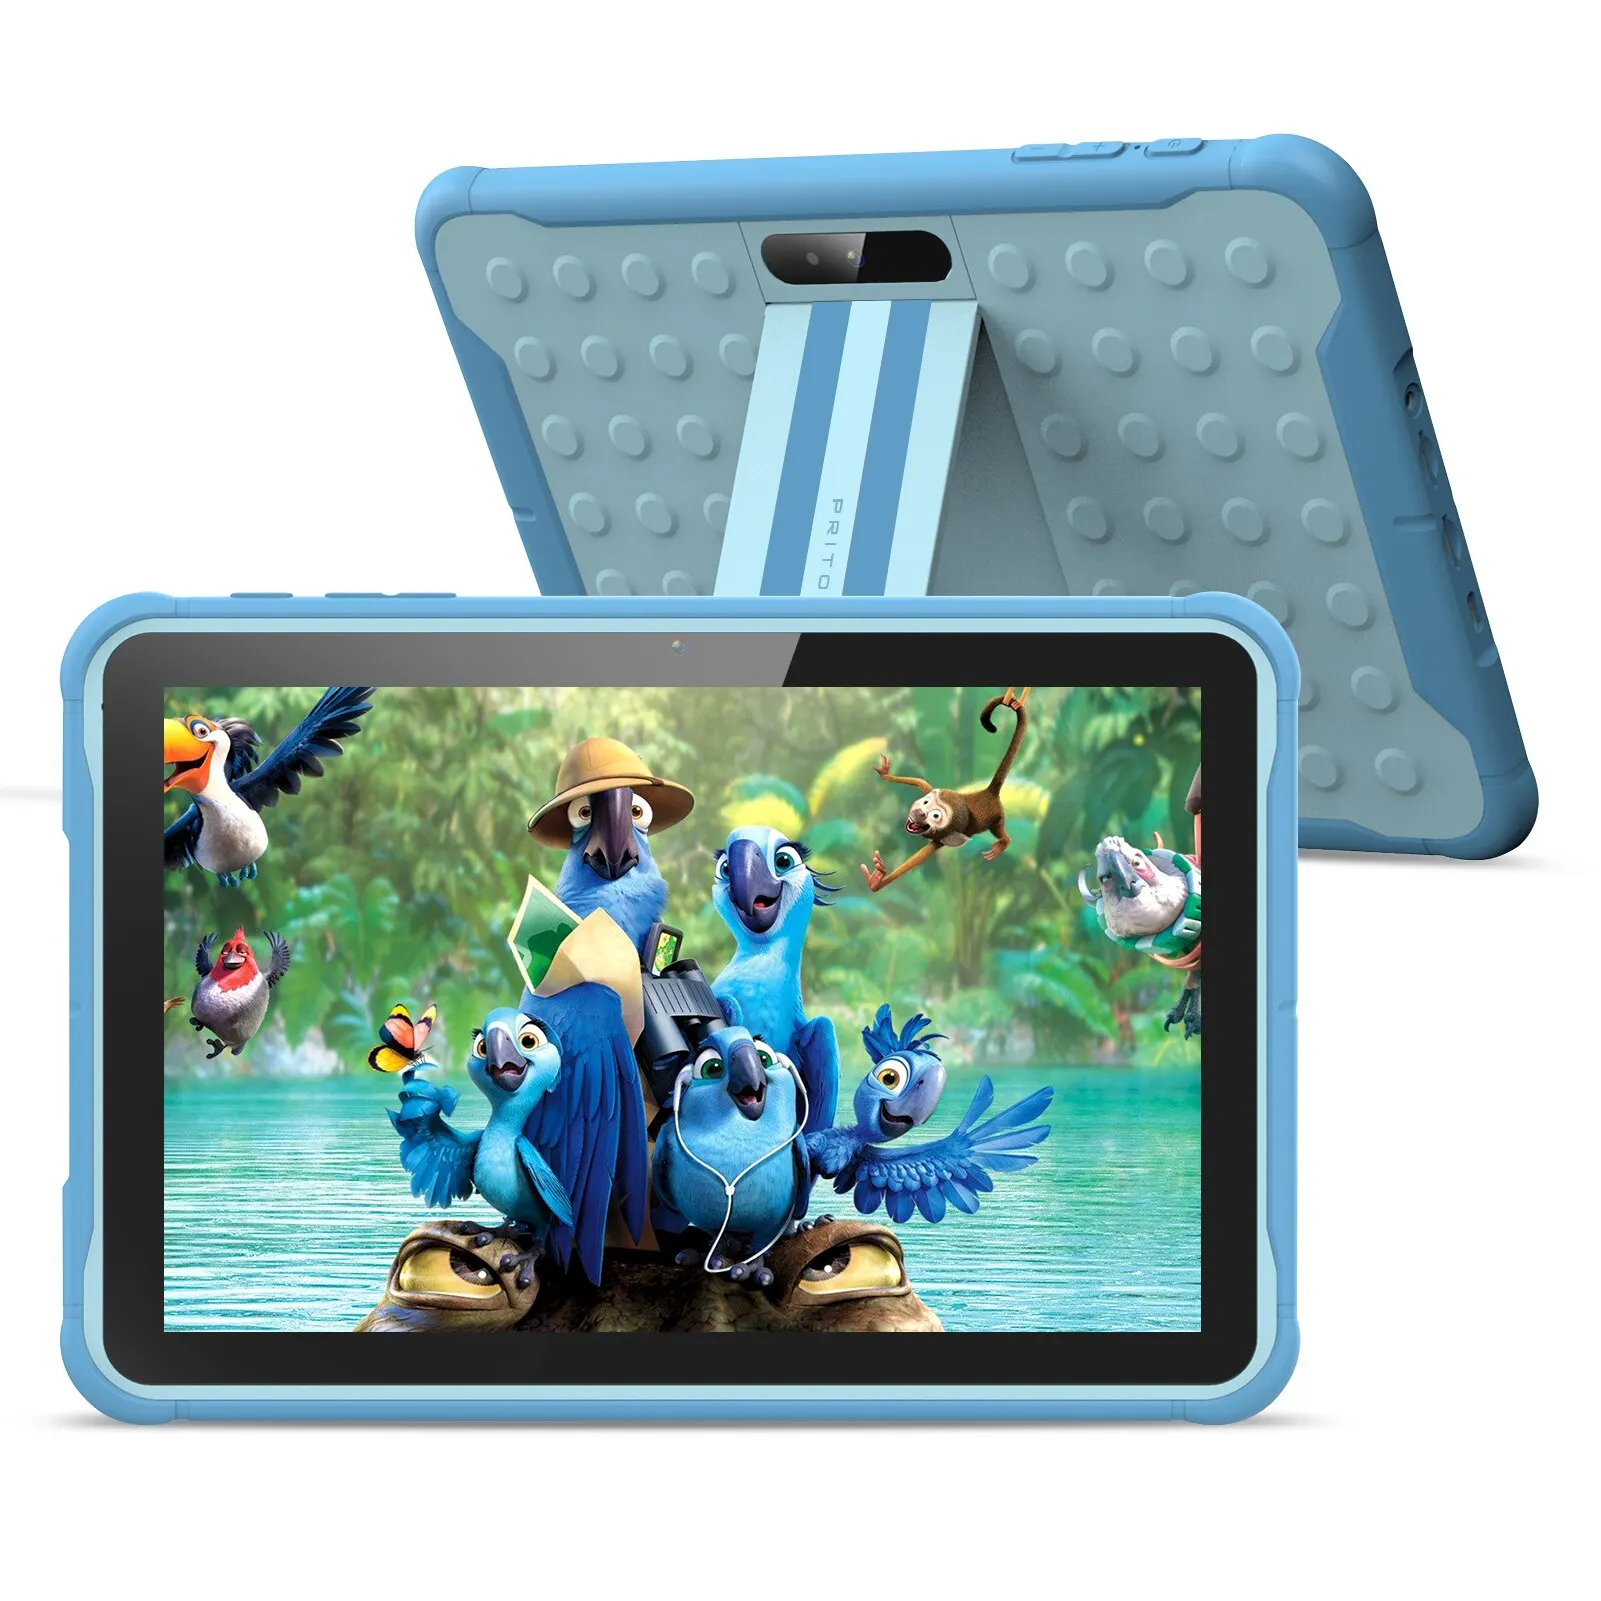 

Pritom 10 Inch Kids Tablet Android 10 Go WIFI 3G SIM Phone Call Quad Core Processor 2GB RAM 32GB ROM YouTube with Case